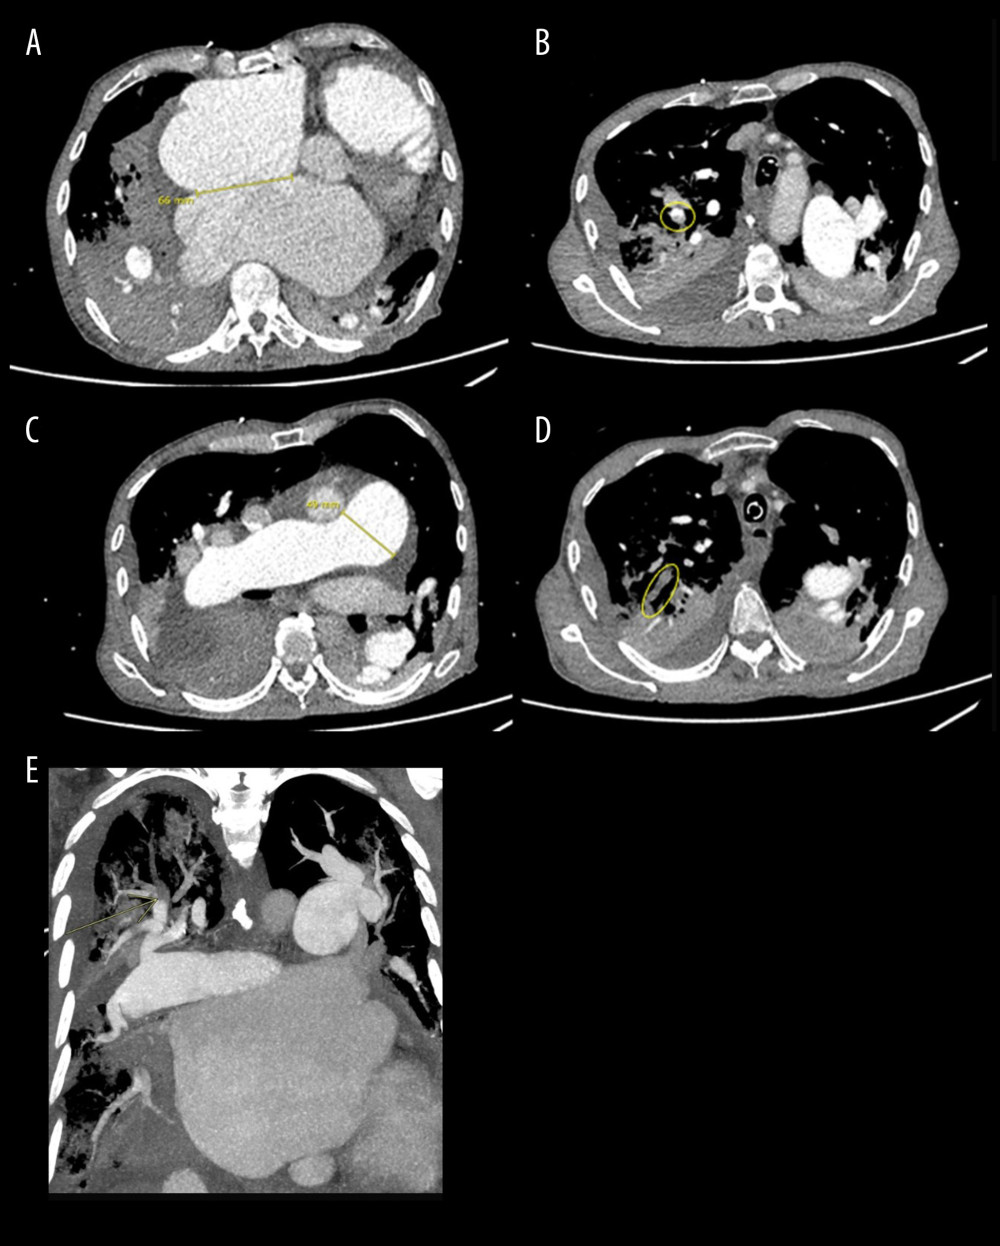 Chest CT angiography that confirms the presence of A: A large atrial septal defect (almost 7 cm), B: Acute (right upper lobe) and D: Chronic (left pulmonary artery and right lower lobe) pulmonary thromboembolism, associated with C: Dilation of the pulmonary artery (sign of pulmonary hypertension). E: Coronal projection with arrow marking a complete filling defect of the pulmonary artery for the posterior segment of the right upper lobe.